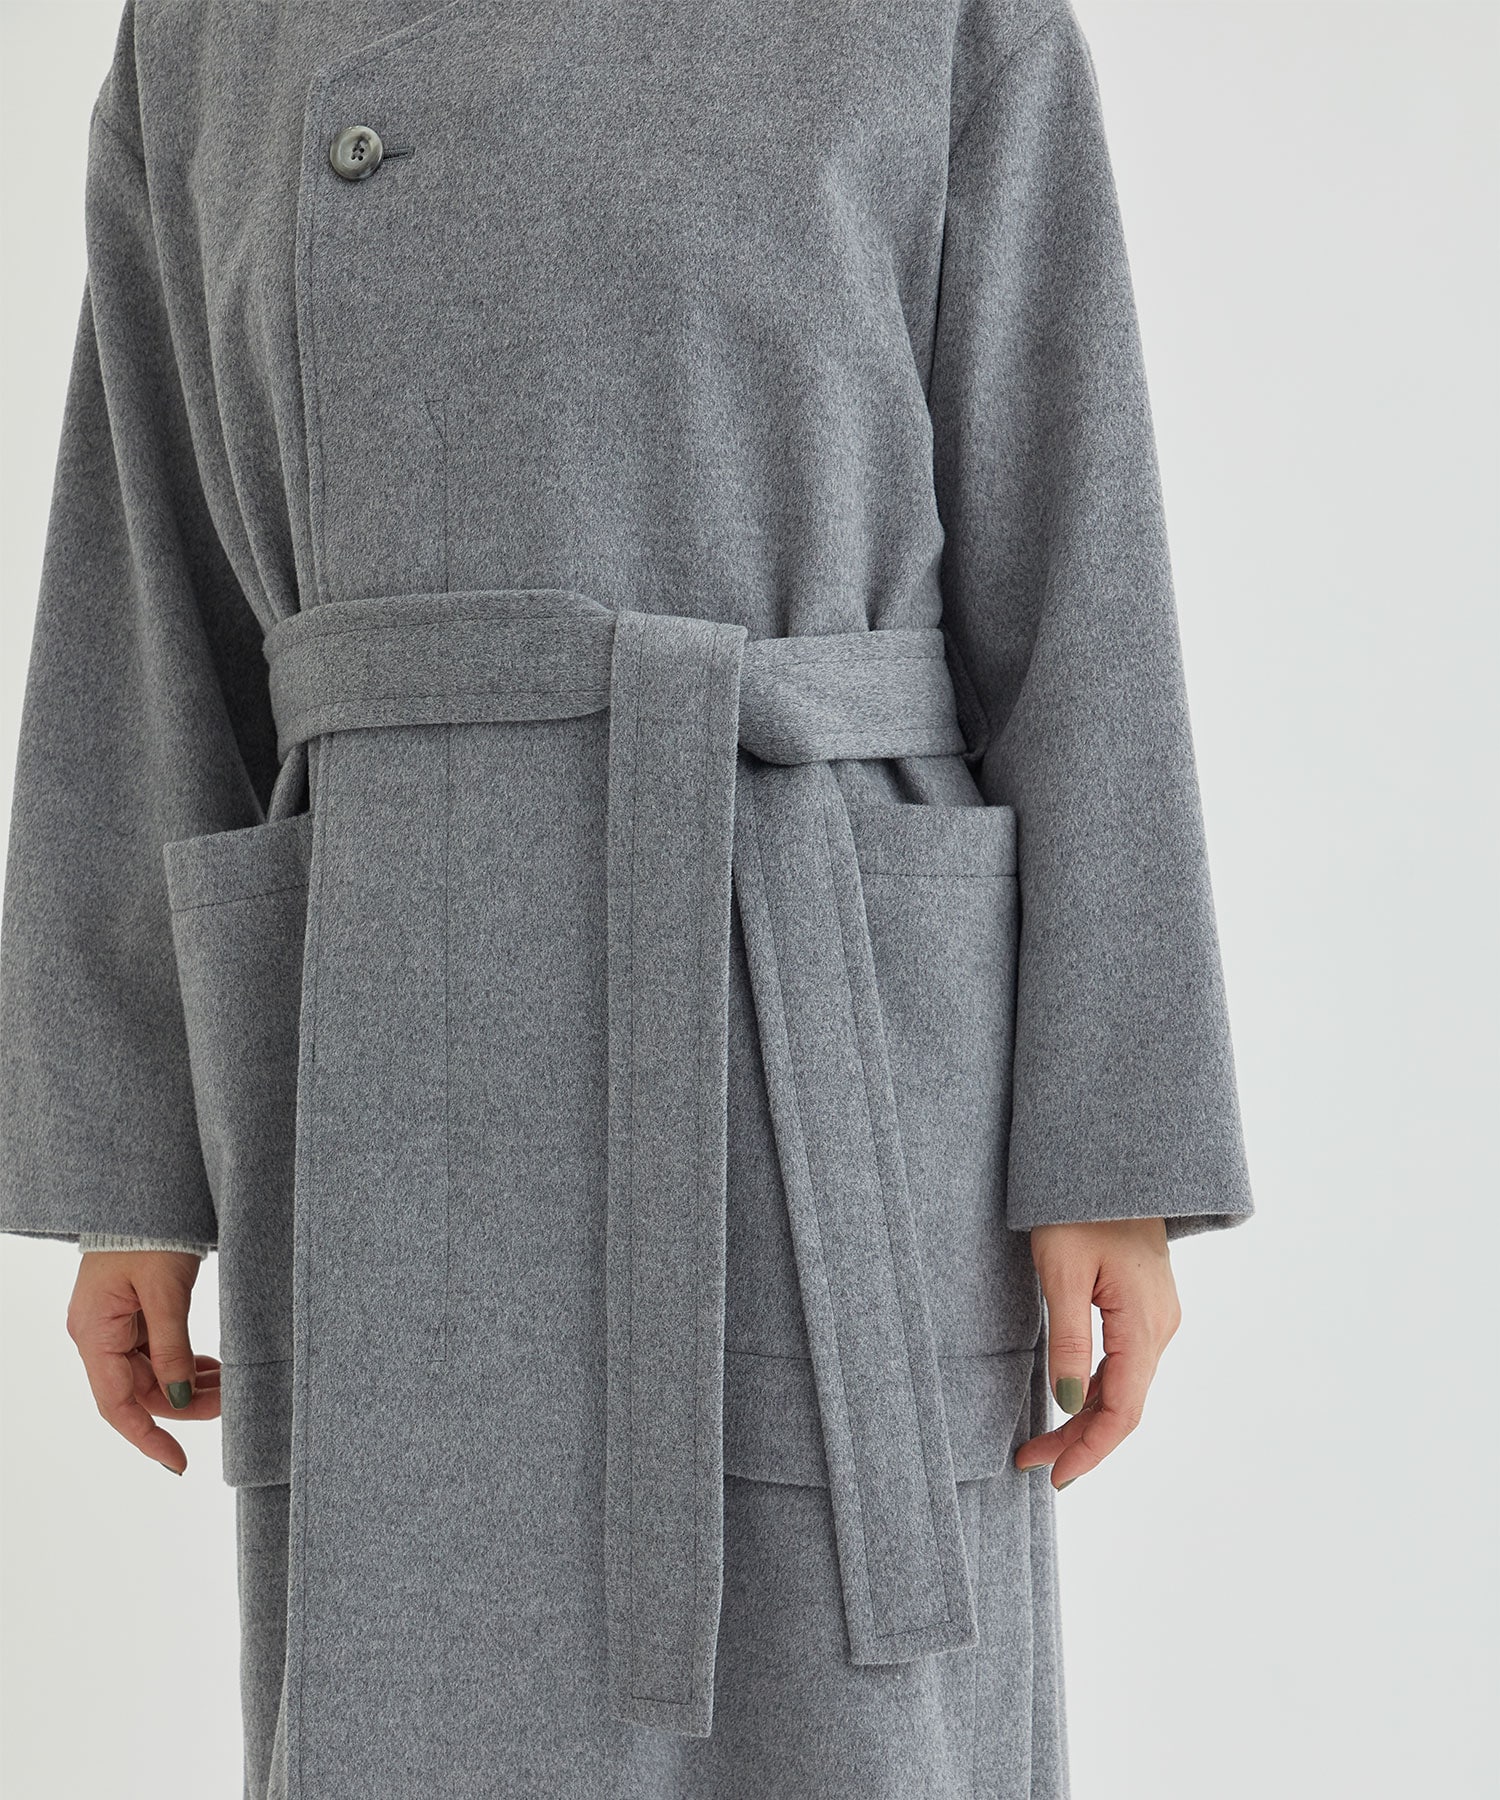 belted no collar wool coat(36 GREY): THE PERMANENT EYE: WOMENS 